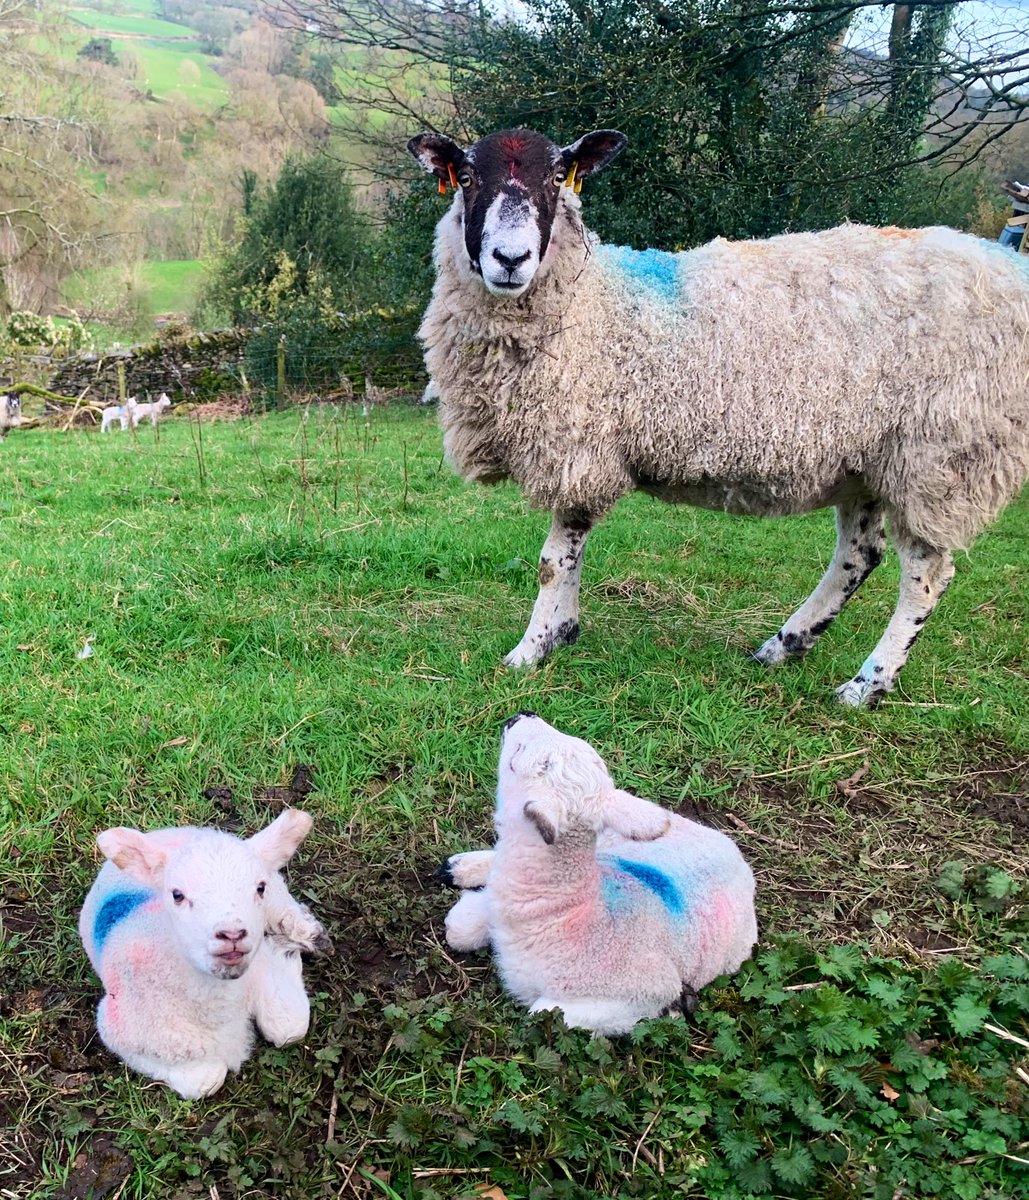 Baaa! #HappyEaster 🐑 🐣 🐰 🐥 🐑 Lovely sunny day with new #lambs ☀️ #LakeDistrict #BankHolidayWeekend